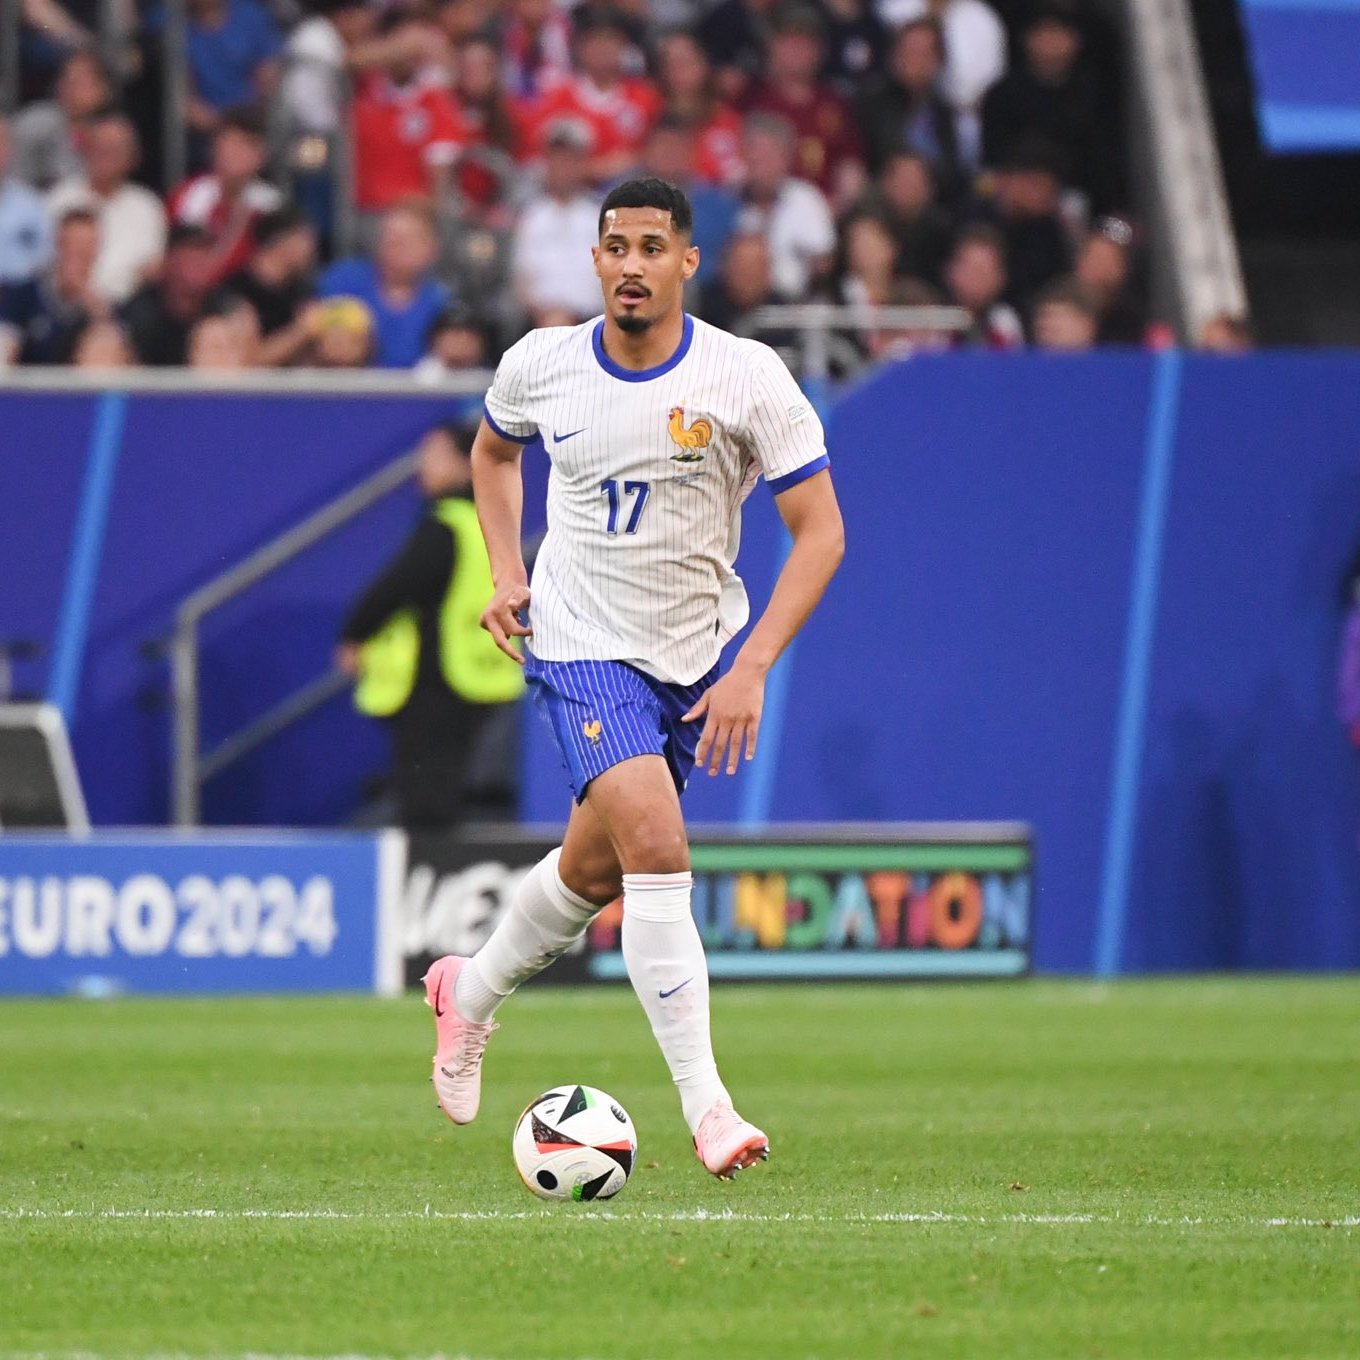 Football Tweet  on X: " William Saliba in the first half:  100%  duels won  100% successful tackles  2 clearances  92% successful  passes Taking his Arsenal form into #EURO2024 https://t.co/sQ0LFNEnlP" / X